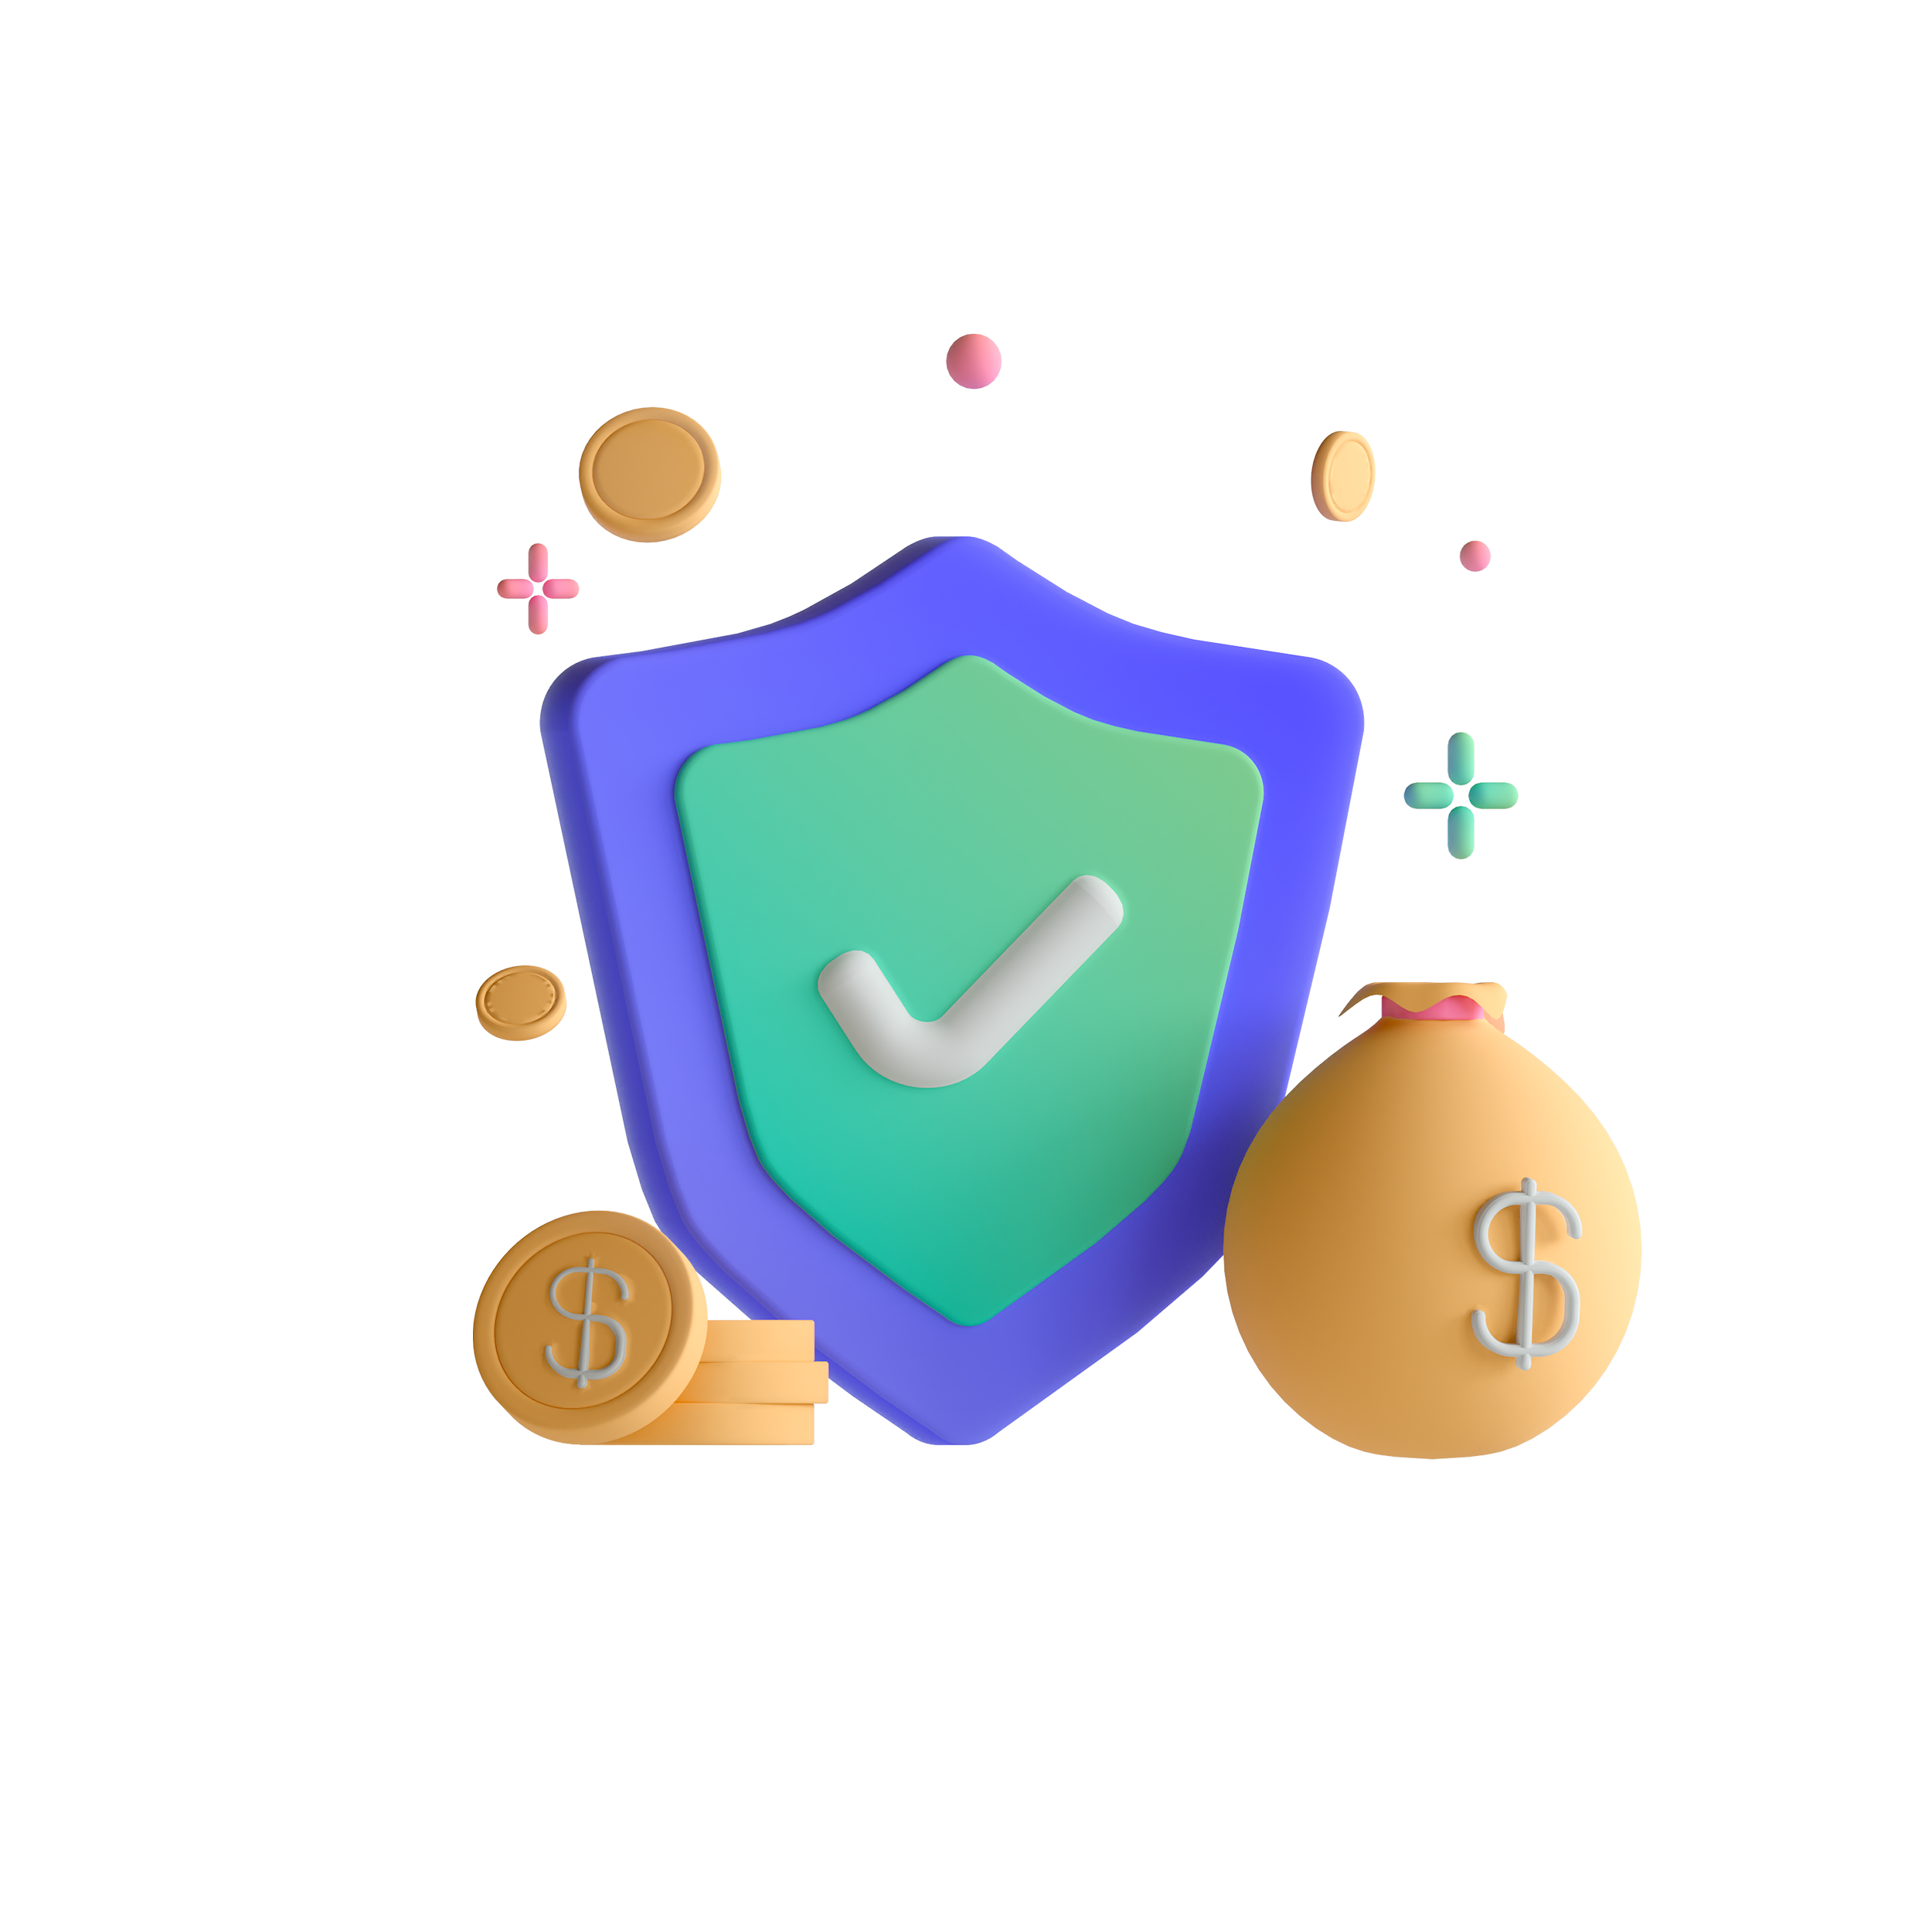 Cryptocurrency 3D shield to show the ProfitRocket AI project is secure and safe to invest into. 